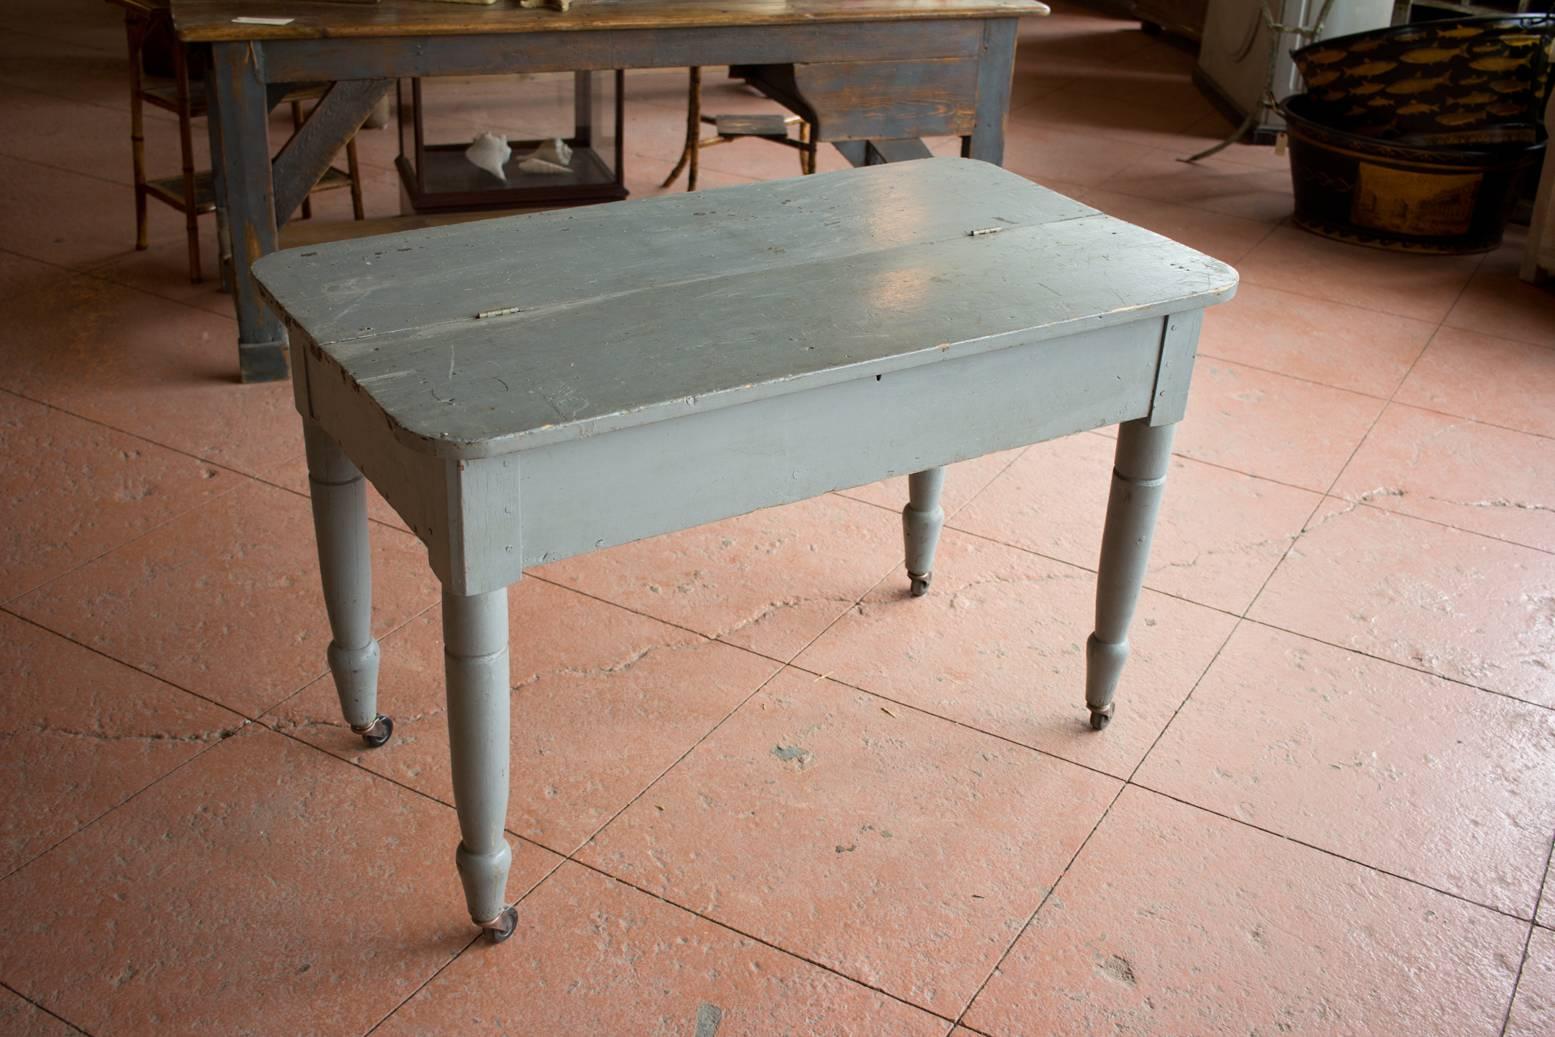 This is an unusual painted American mercantile desk or table on casters. Half the top flips up for storage. Great kitchen piece.